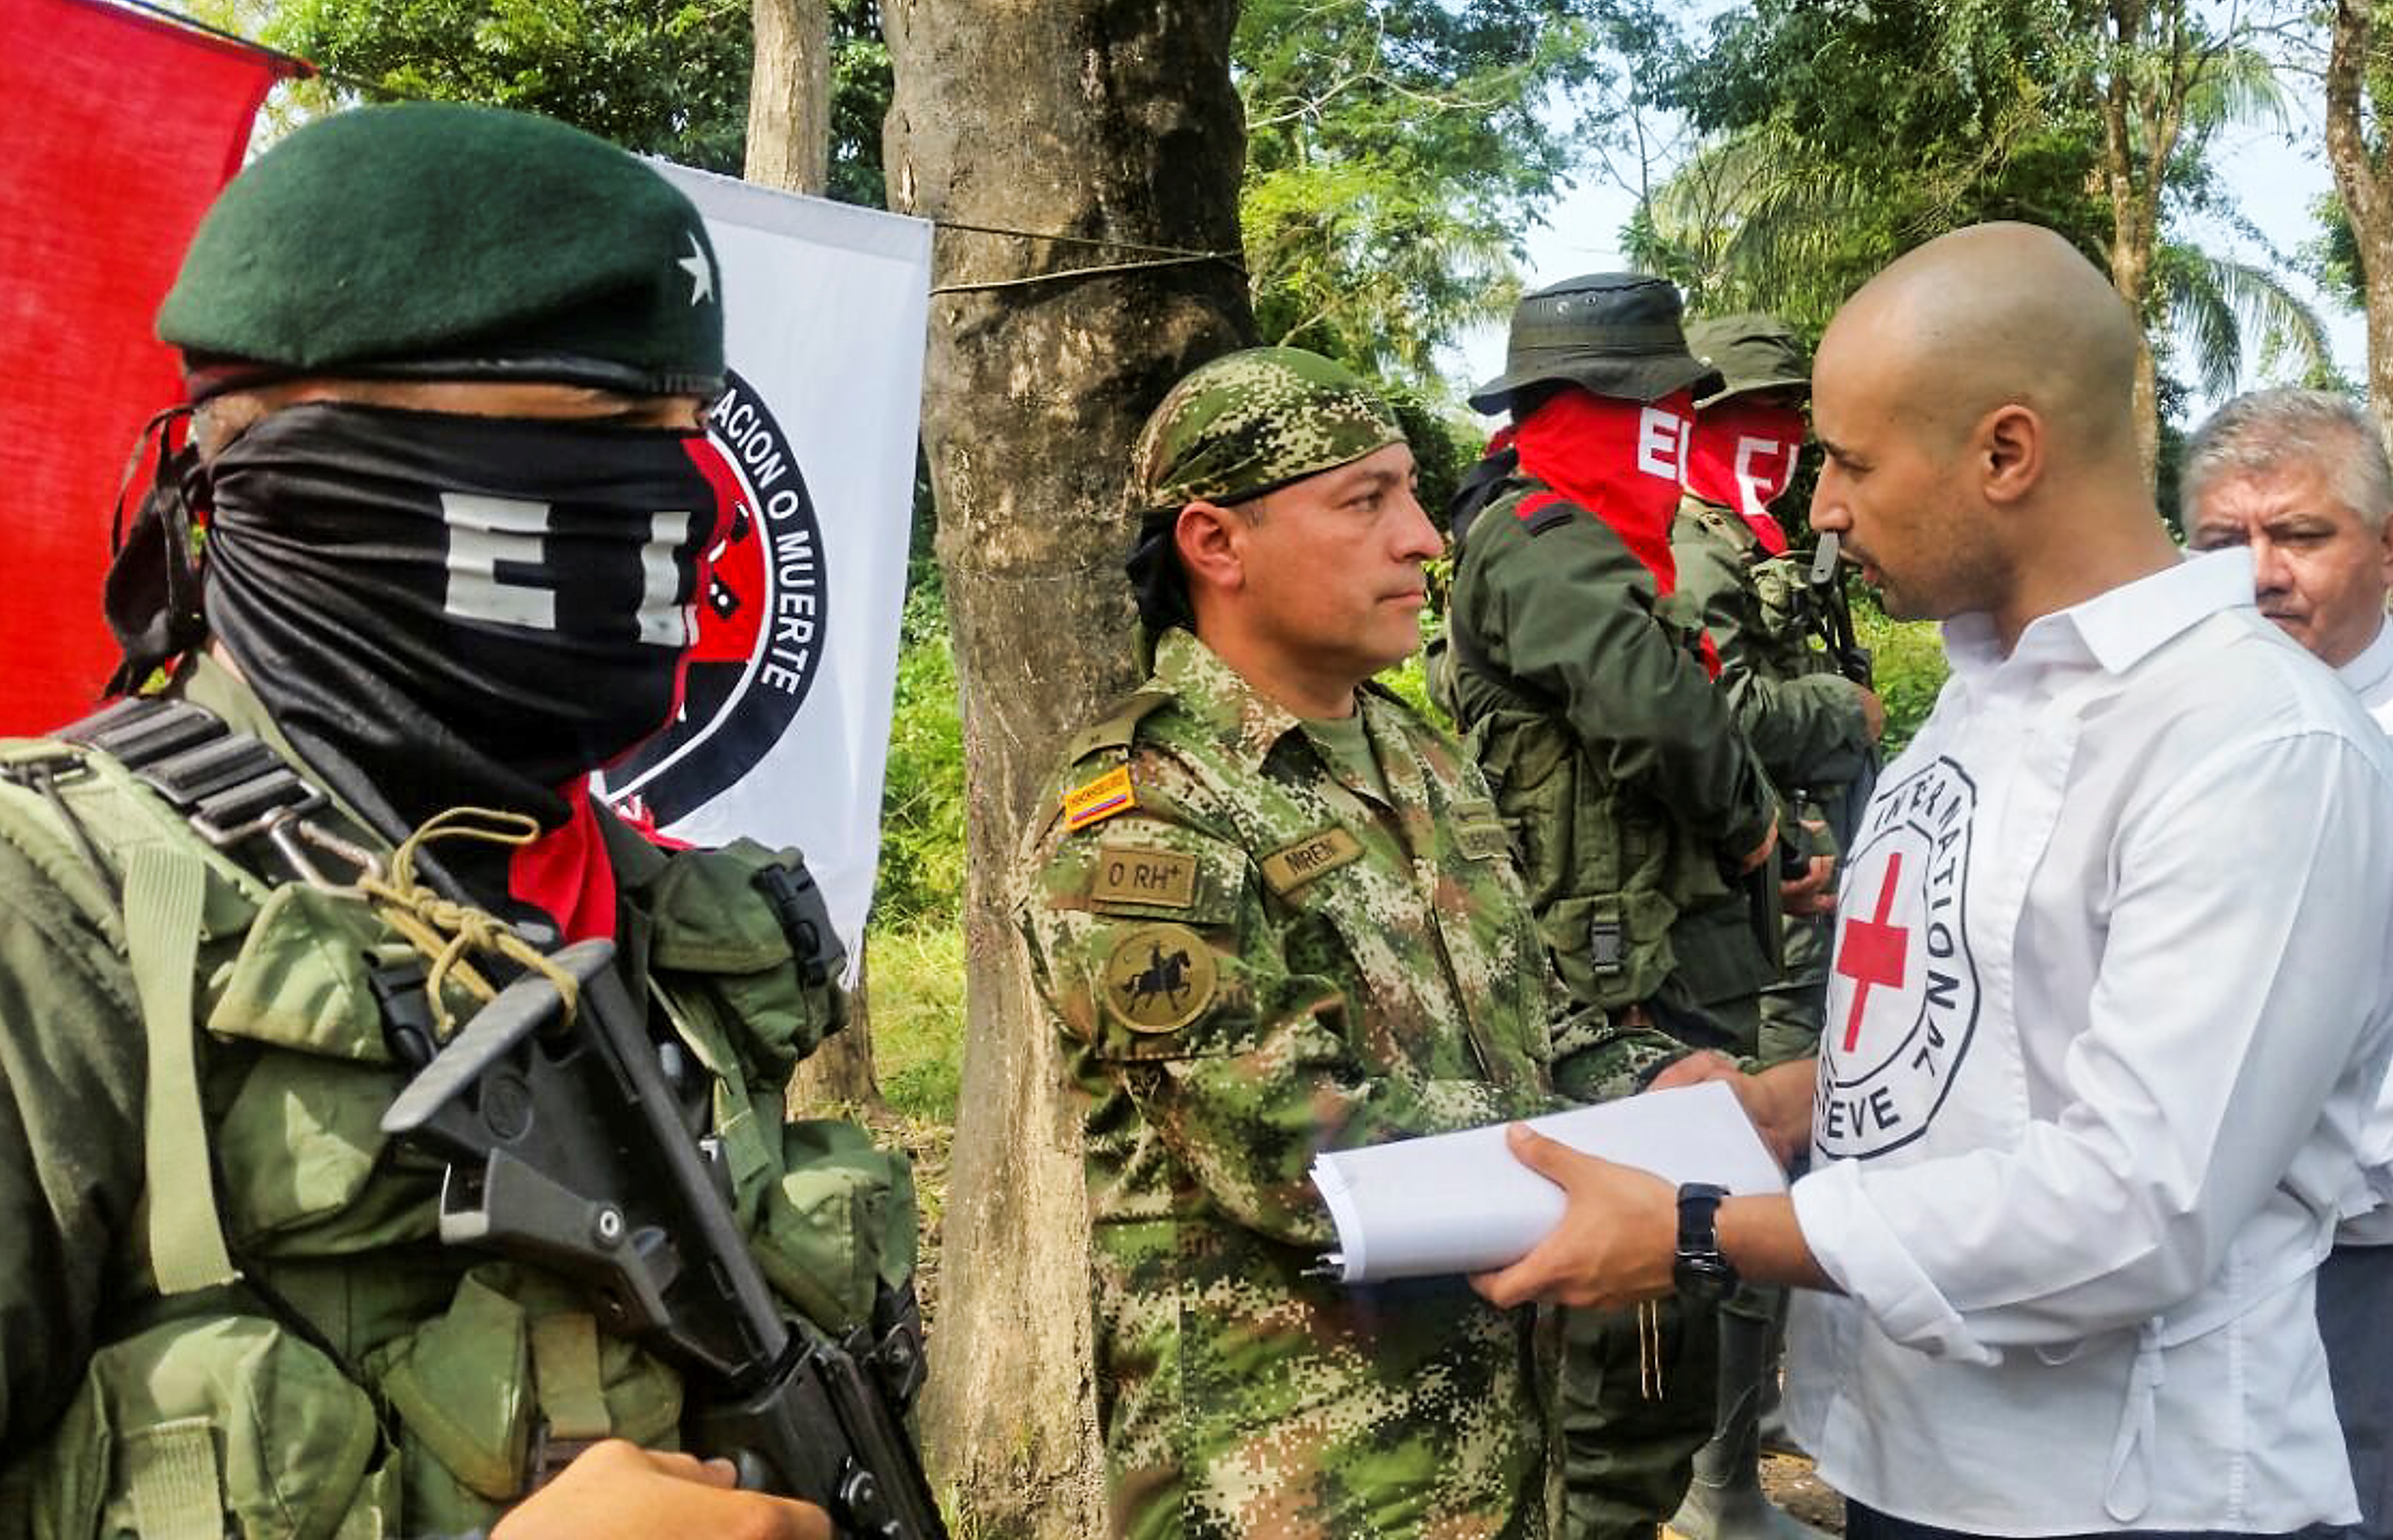 Colombian Soldier Fredy Moreno (C) who was kidnaped by National Liberation Army (ELN), shakes hands with a Red Cross member next to ELN guerrillas, before his release in Arauca, Colombia on February 6 2017. 

Colombia's ELN rebels freed soldier Fredy Moreno Mahecha in a rural area of Arauca department, in a new goodwill gesture on the eve of peace talks to end a 53-year conflict, the Red Cross said.
 / AFP PHOTO / Daniel Martinez